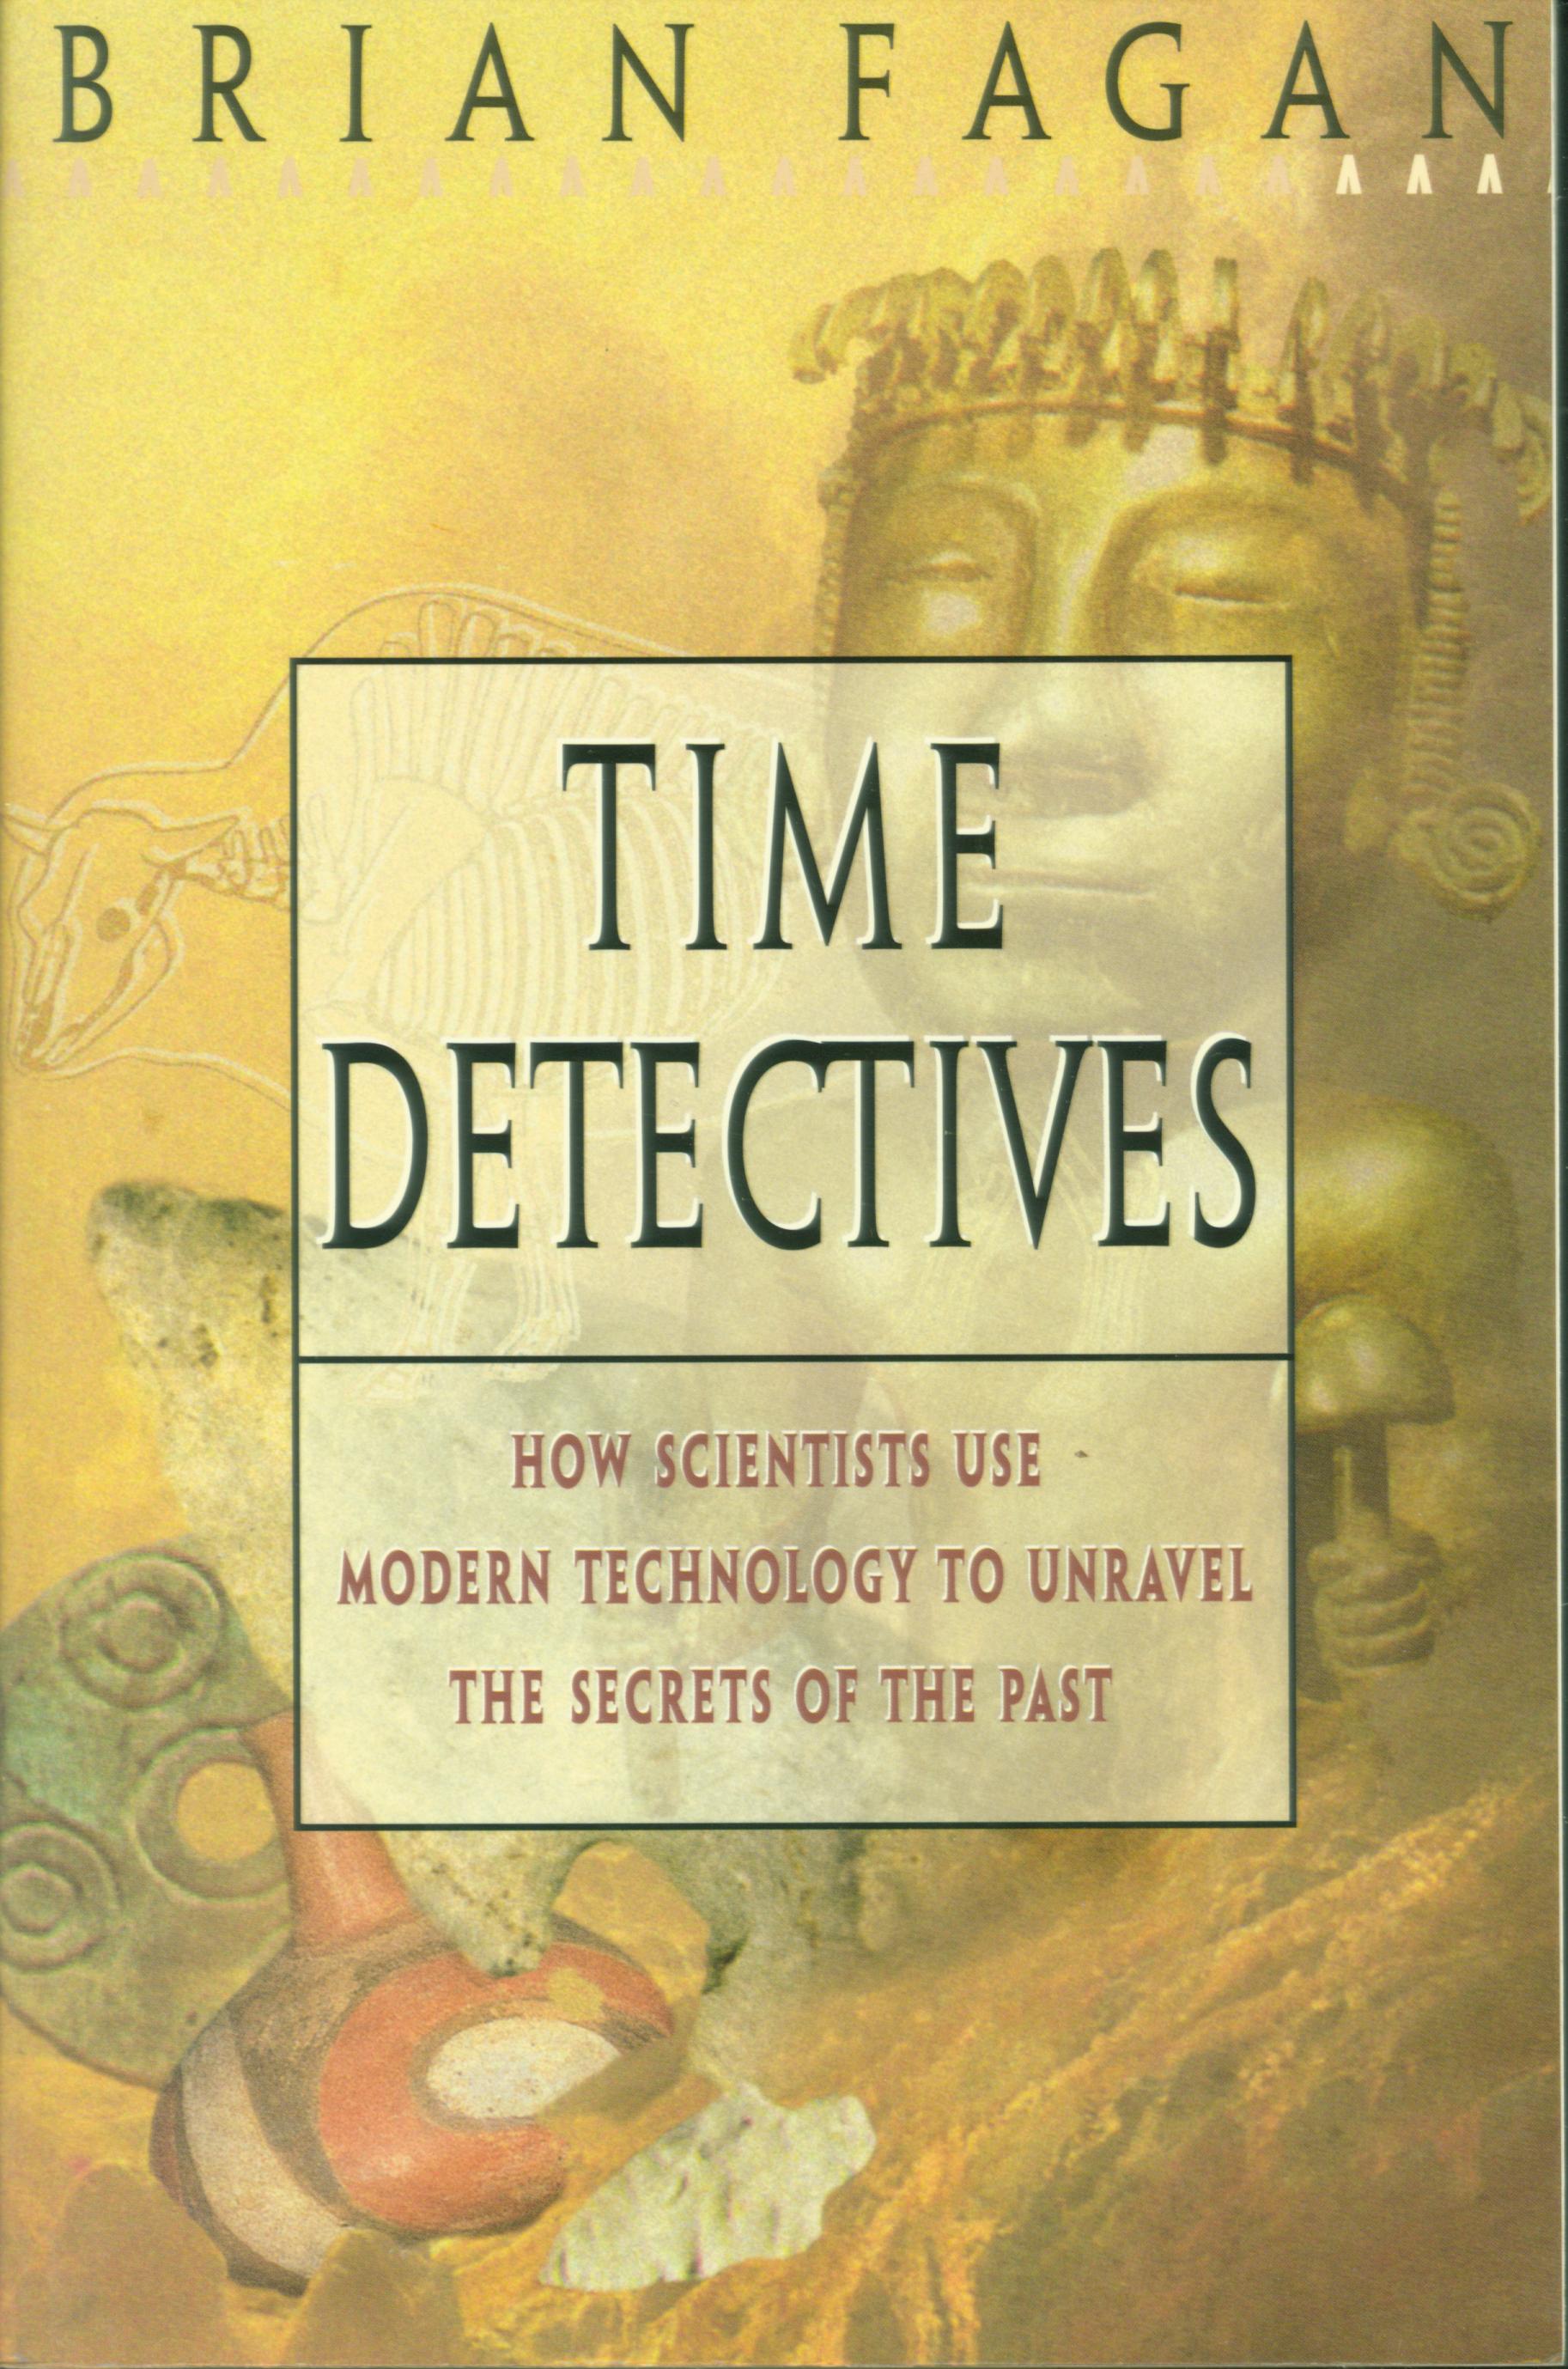 TIME DETECTIVES: how archaeologists use technology to recapture the past--paper.